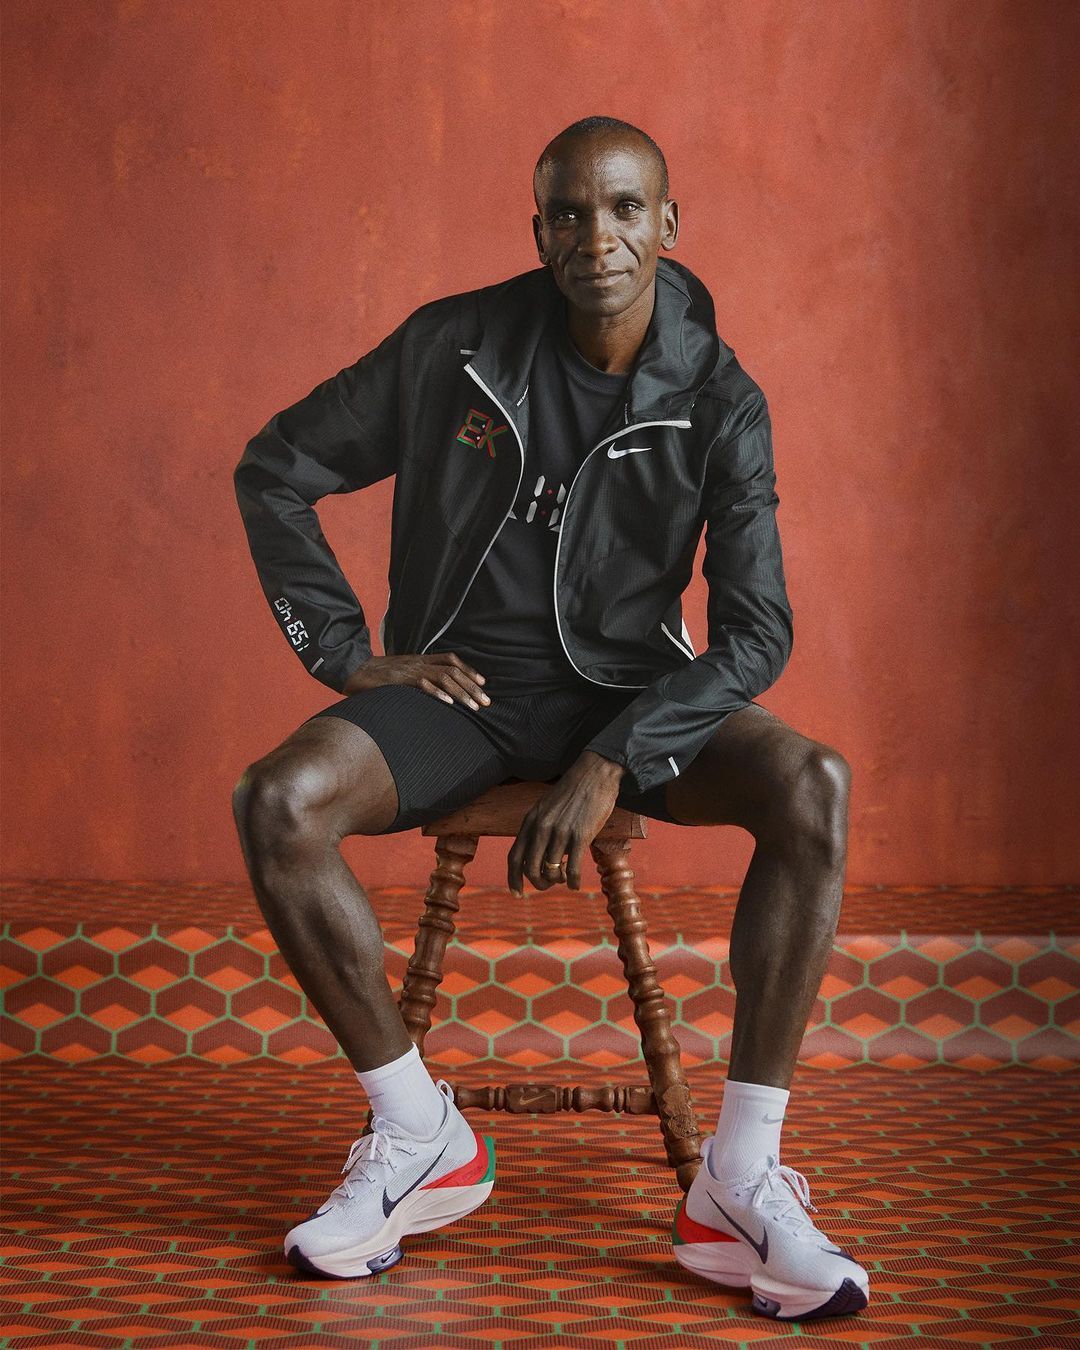 The New Kipchoge Nike Collection Has Dropped